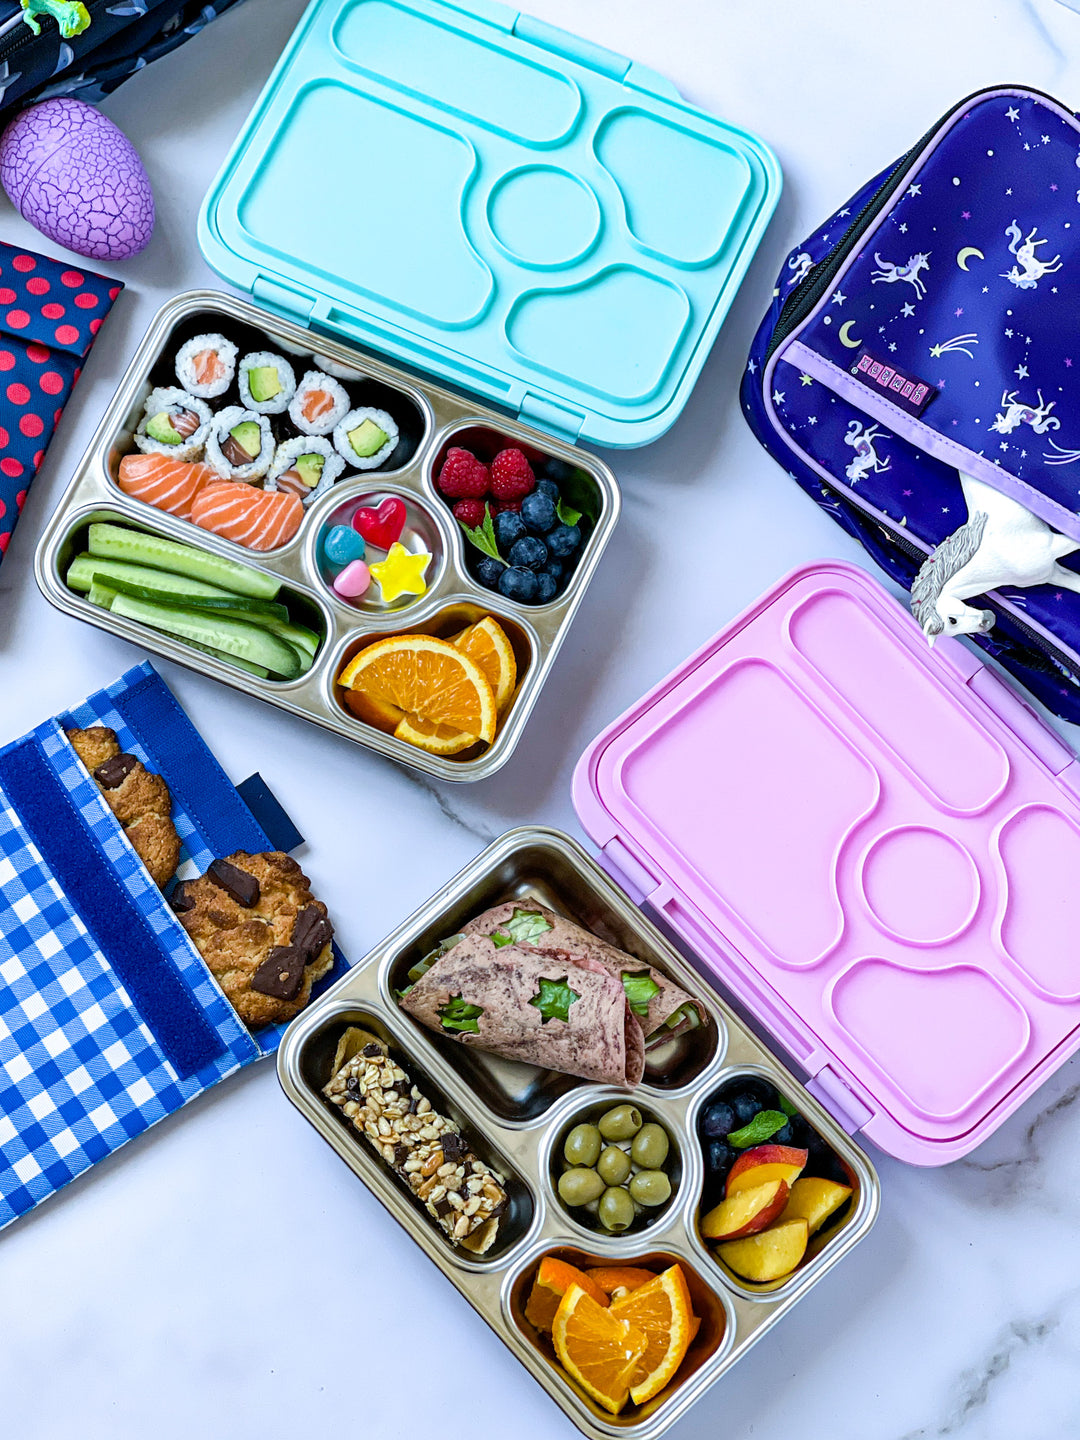 Yumbox and Stainless Steel Lunch Box